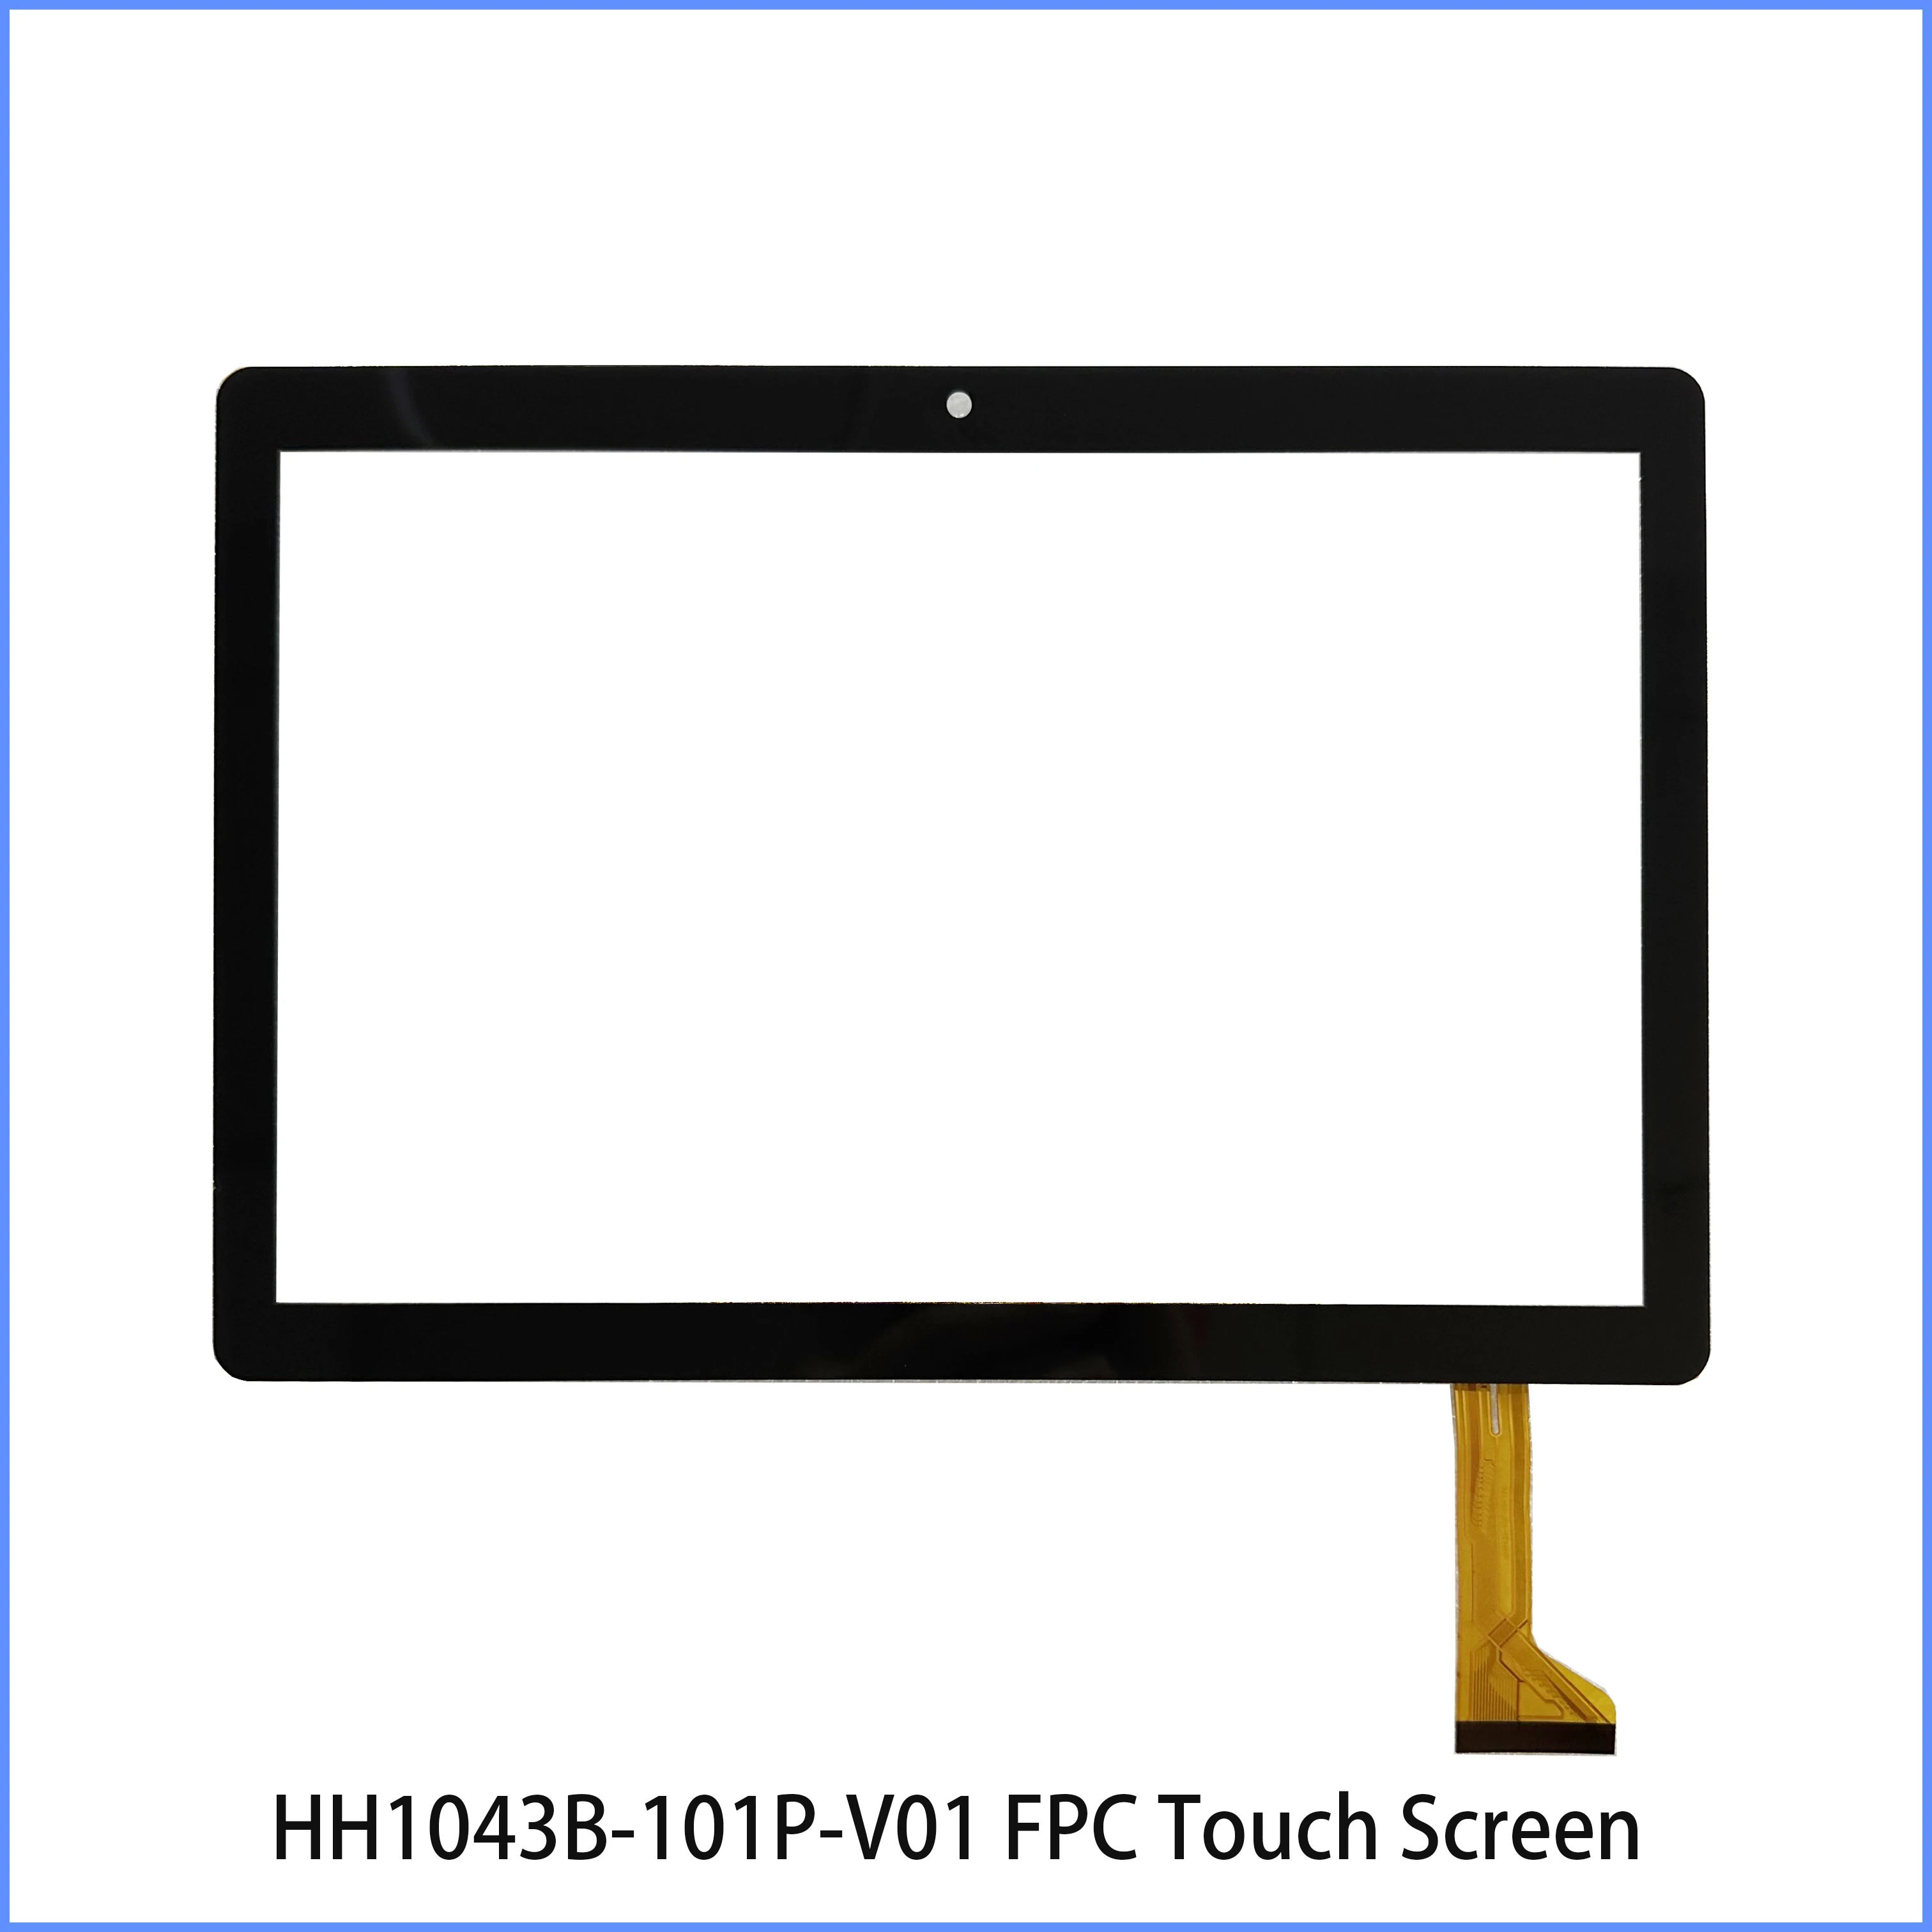 

New Touch 10.1 inch P/N HH1043B-101P-V01 FPC Tablet Repair Capacitive Digitizer Touch Panel Sensor HH1043B-10 P-VO1 Touch Screen